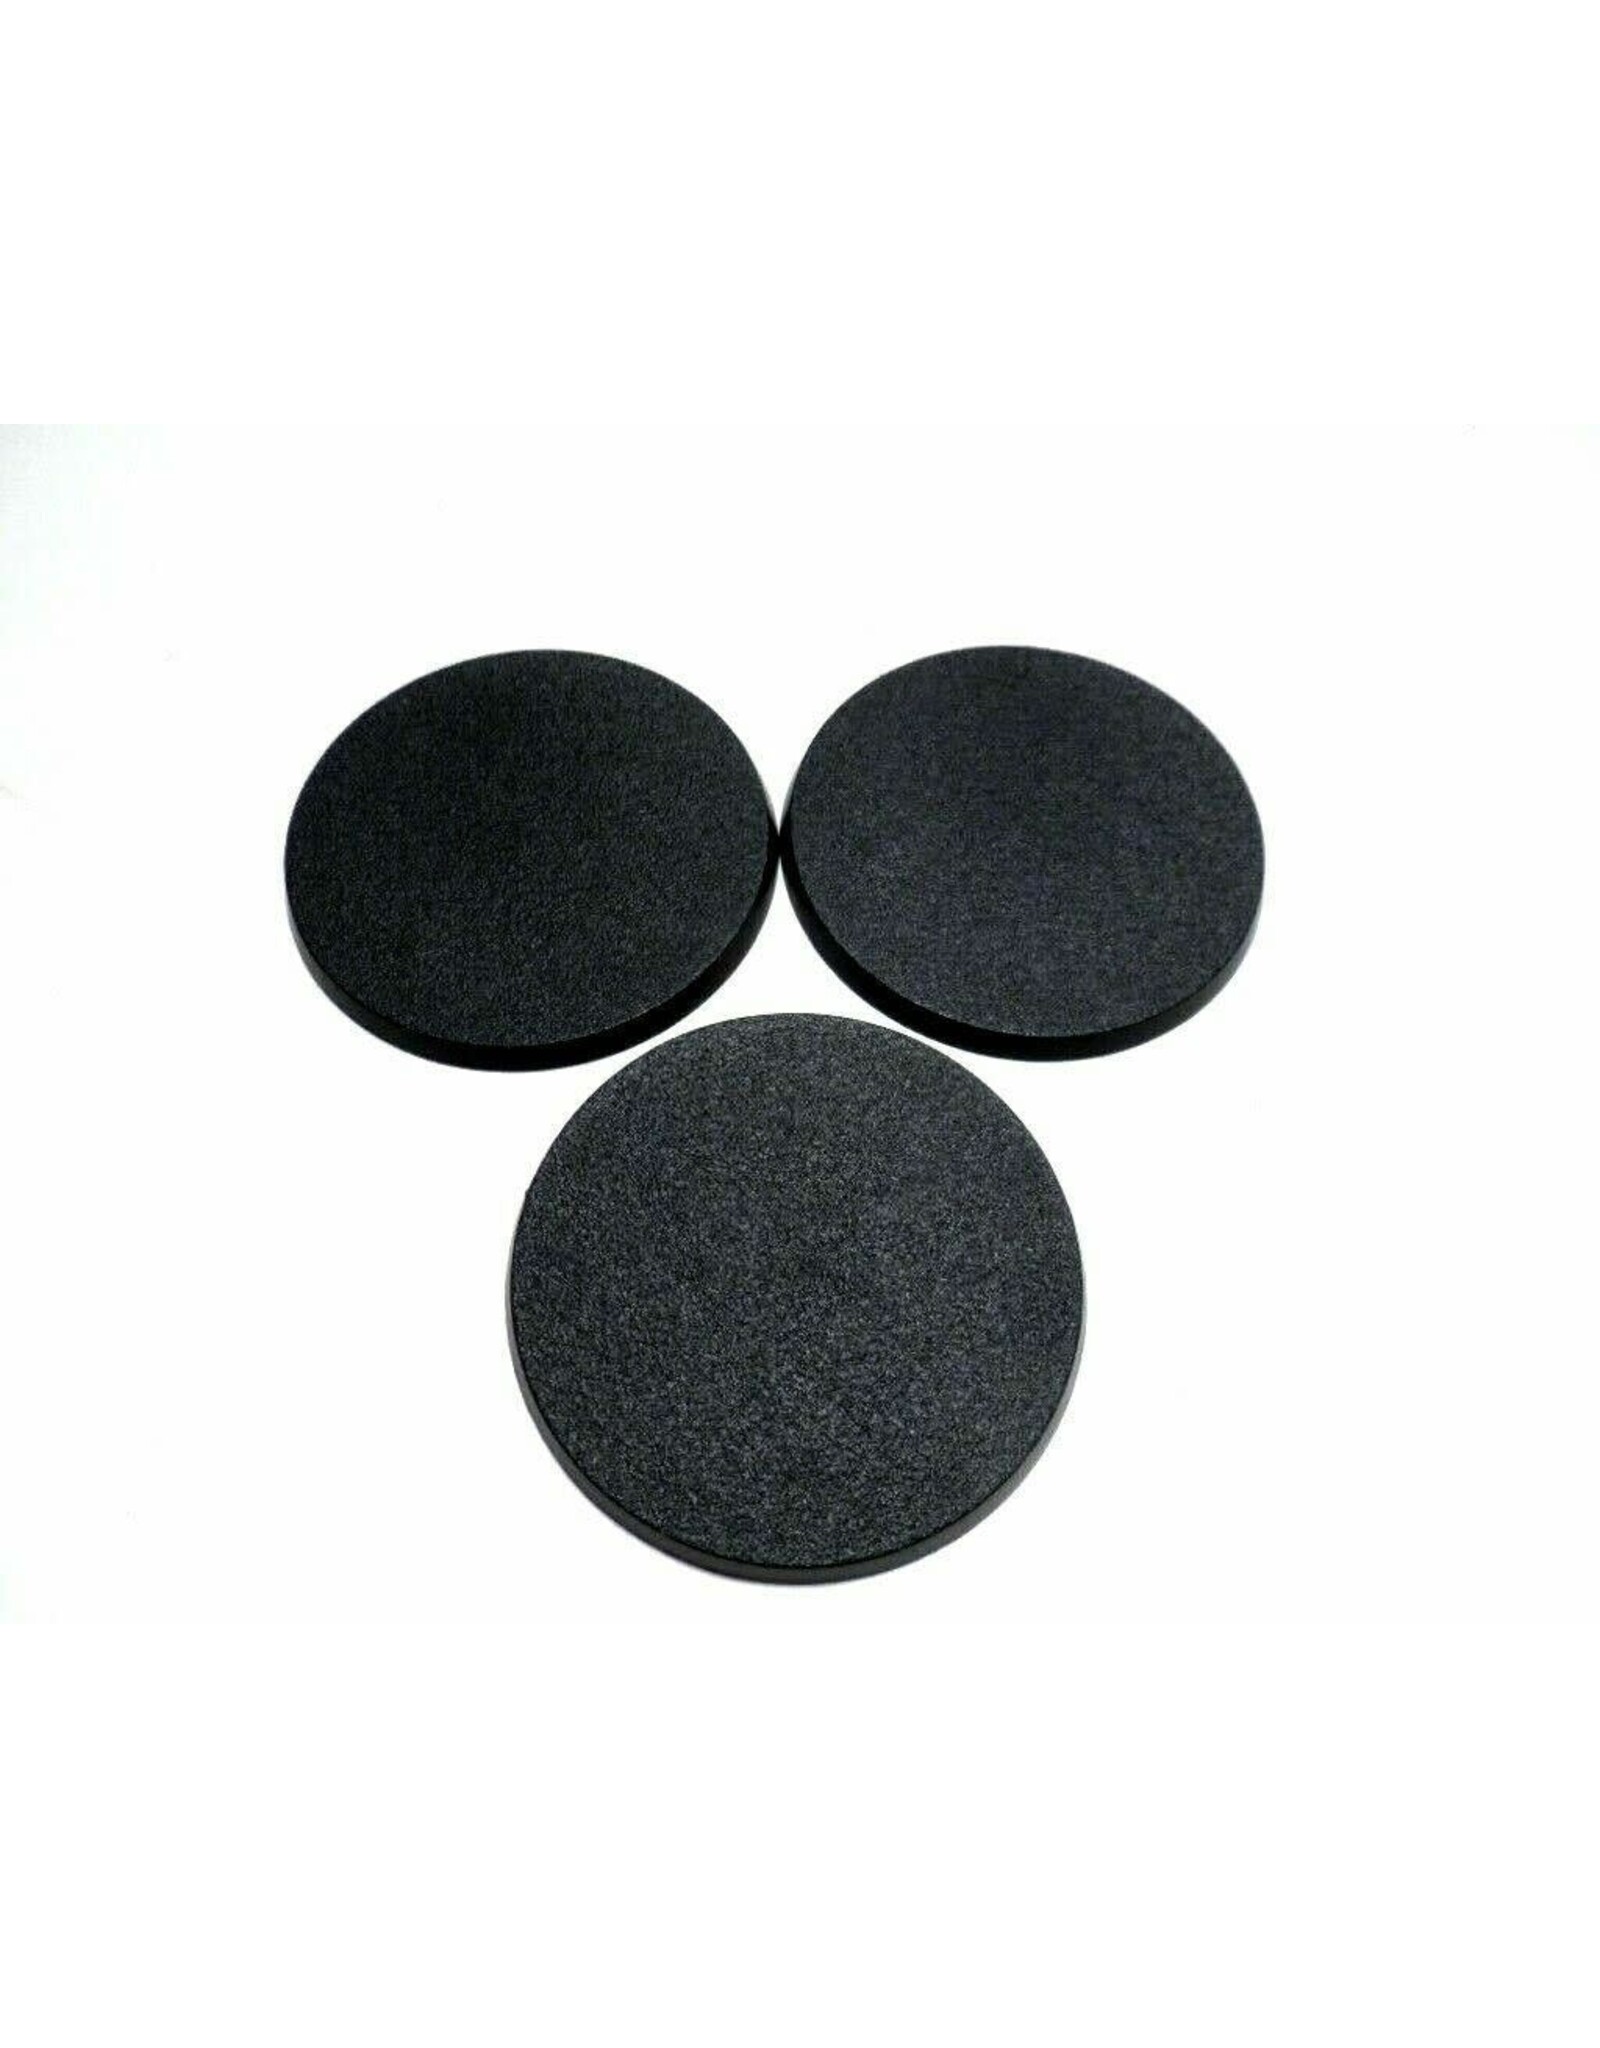 60mm Round Bases (3)